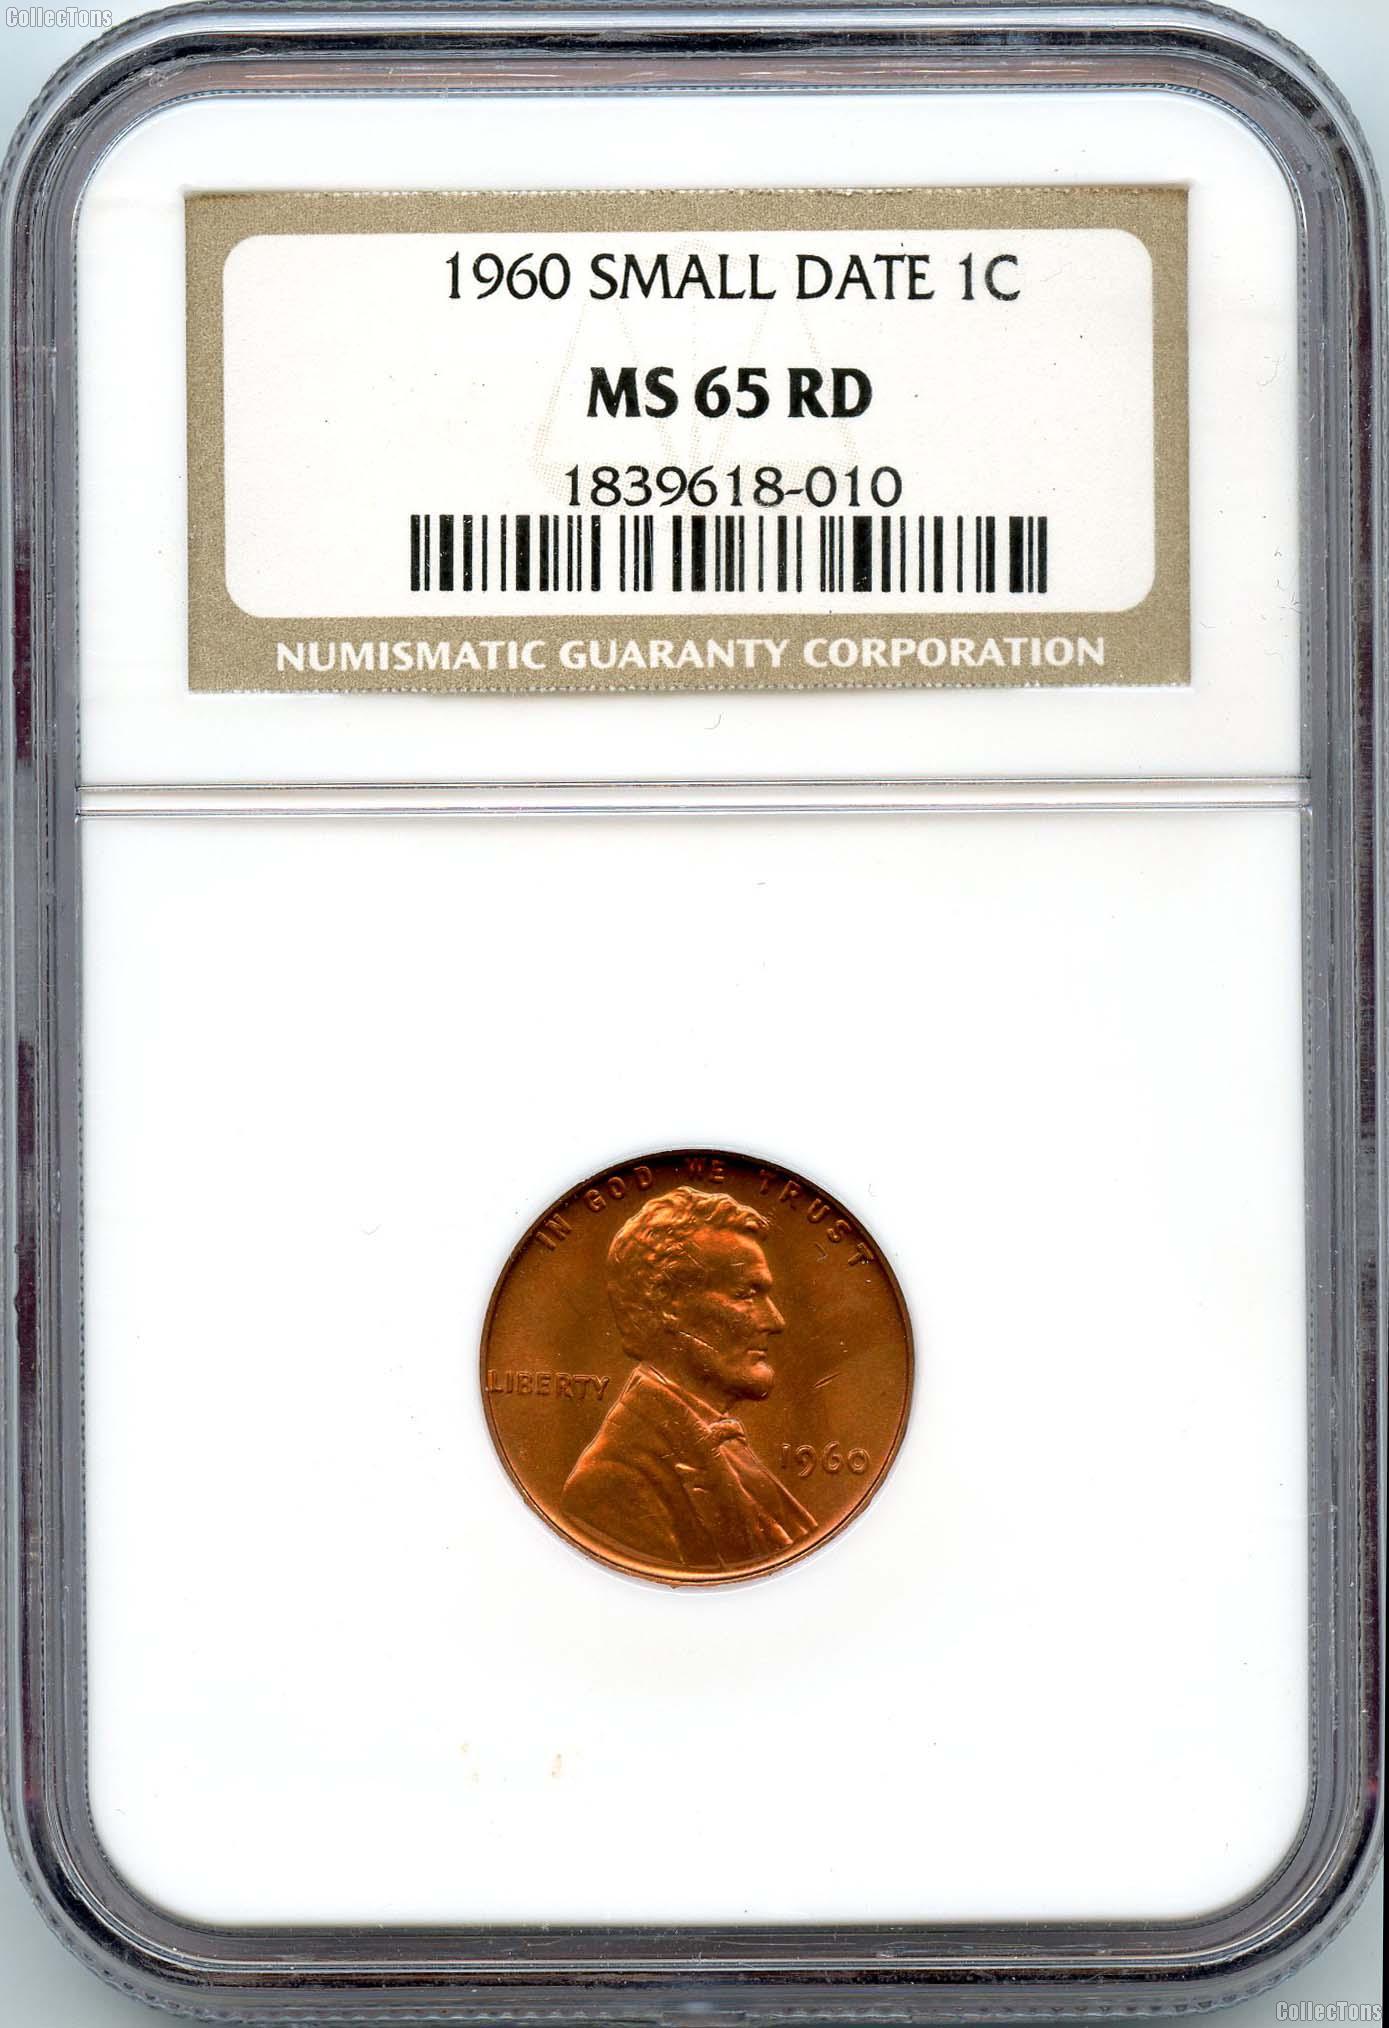 1960 Small Date Lincoln Memorial Cent in NGC MS 65 Red